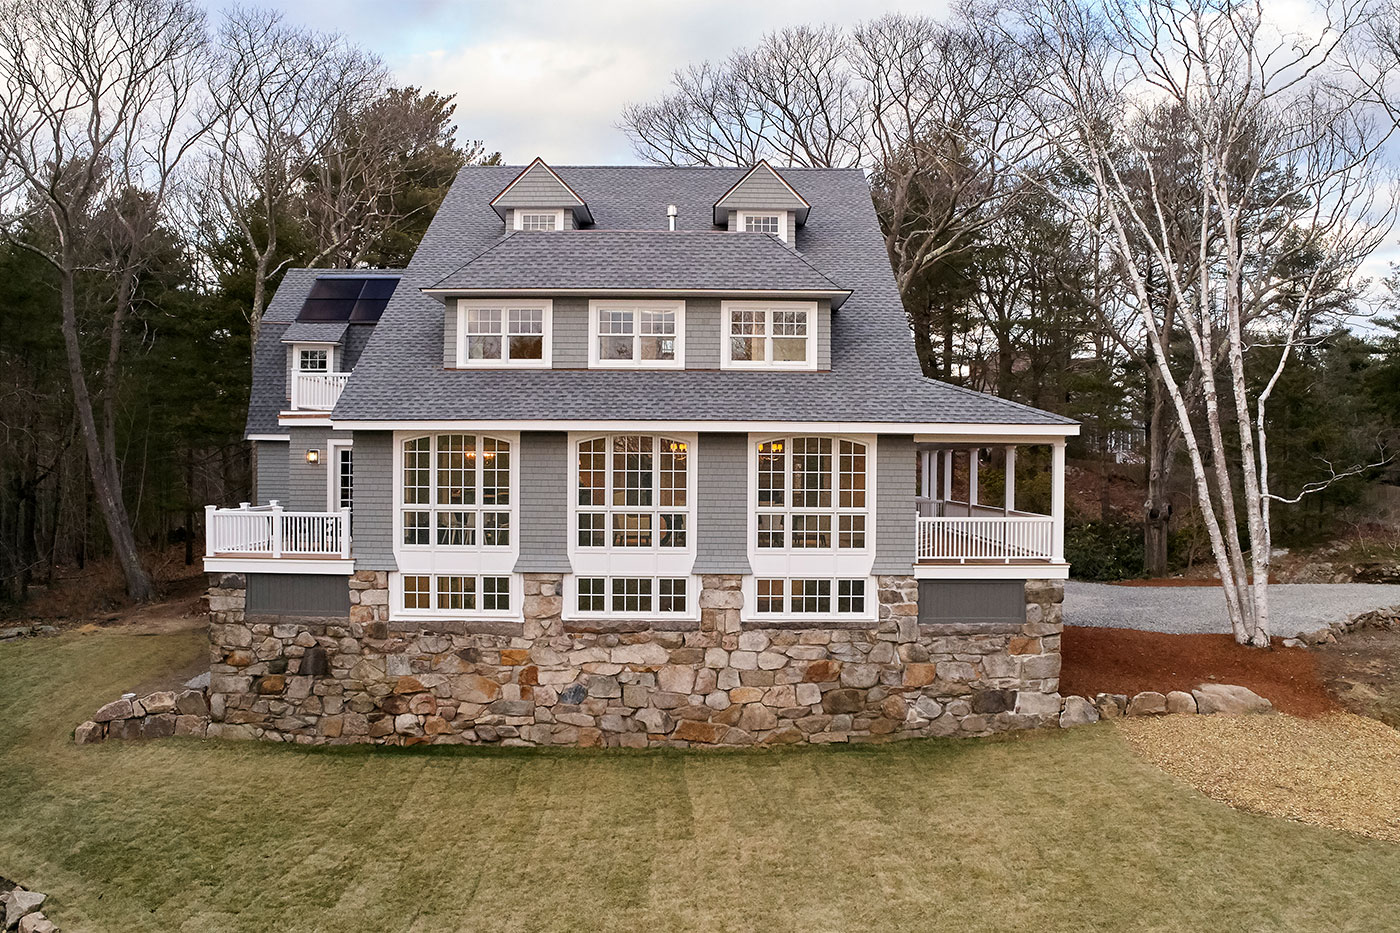 This Old House renovated this 1890s shingle-style home on Cape Ann in Manchester by the Sea.